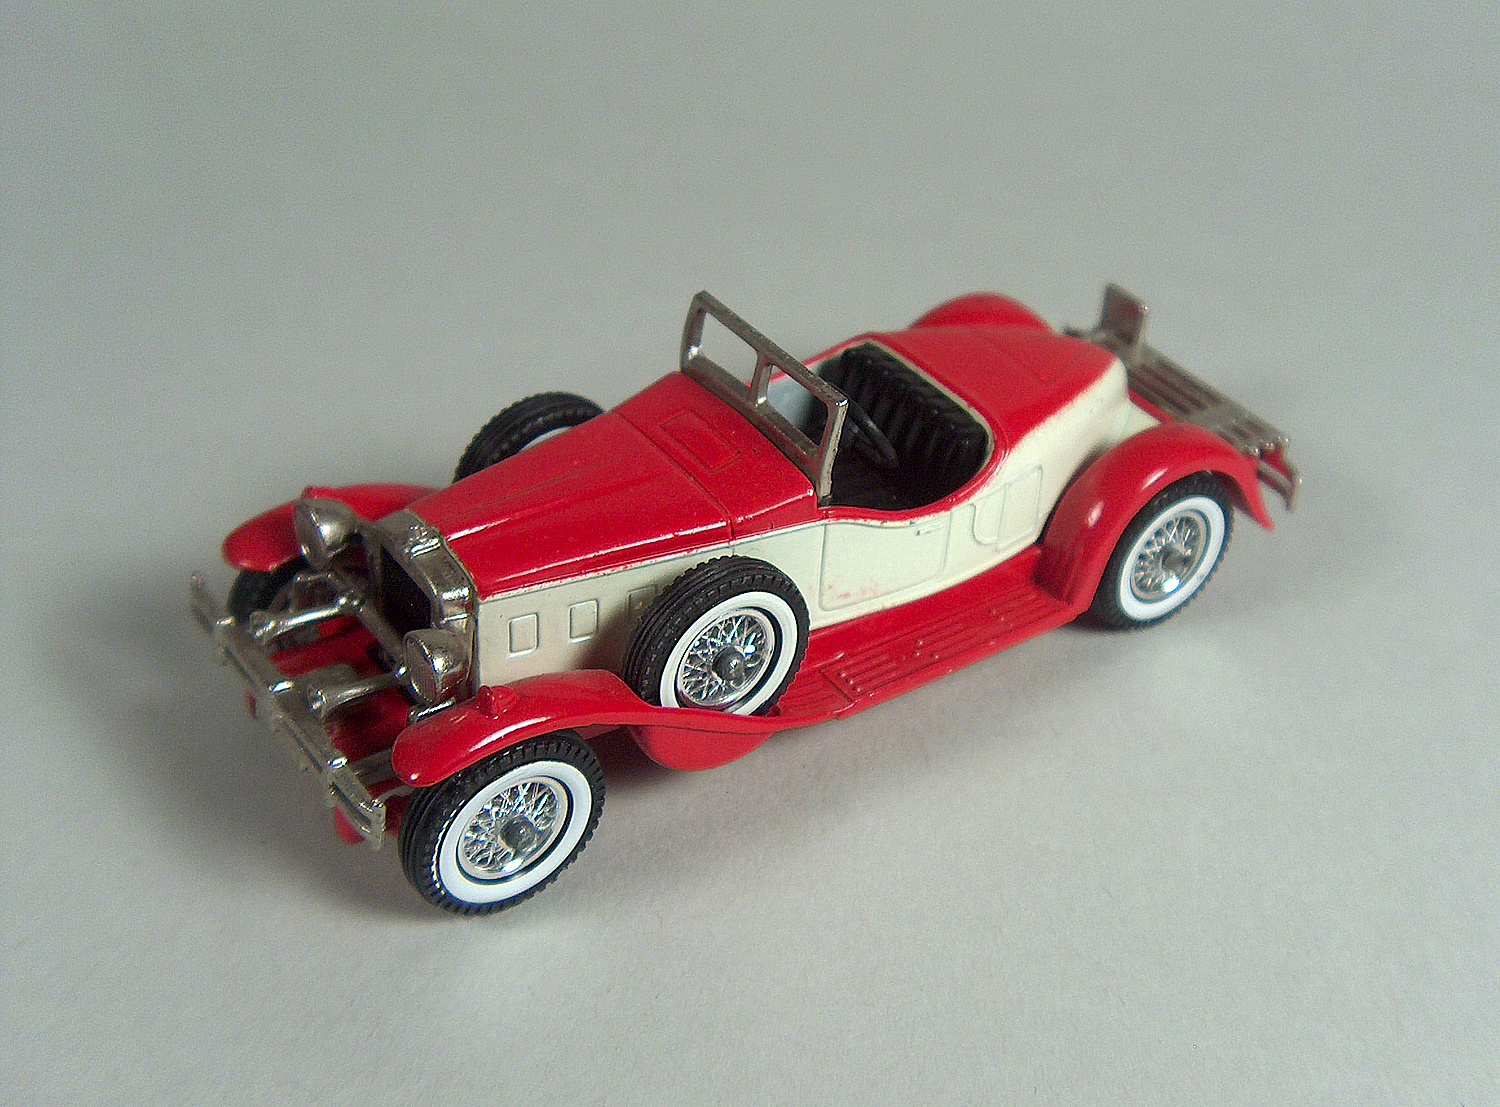 http://www.toybaron.com/images/Matchbox%20Yesteryear%20Cars/Y%2014%20Stutz%201974.jpg